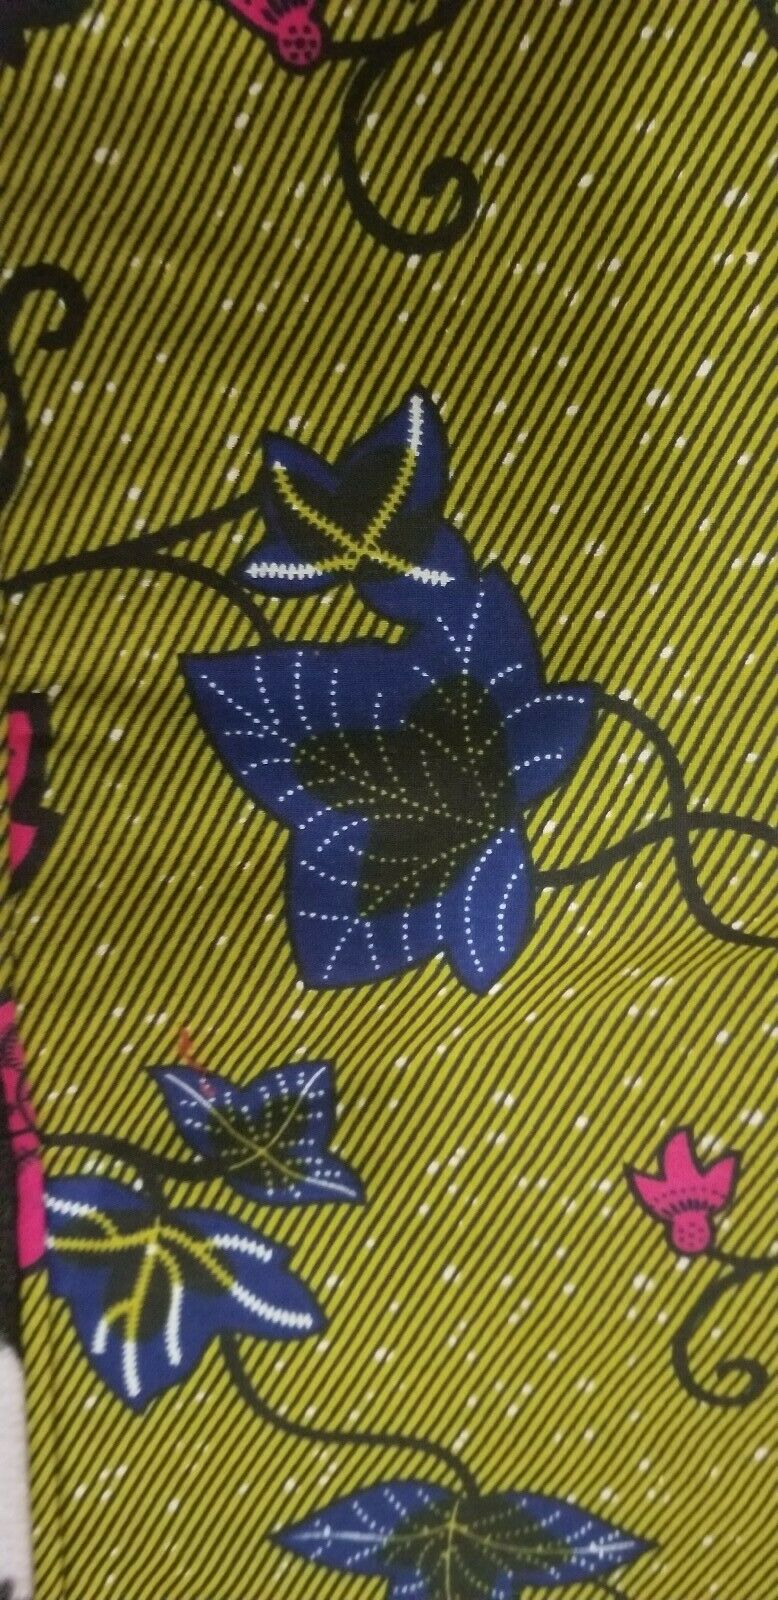 MULTICOLOR African Wax Print 100% Cotton Fabric 3yrds ×(44 in.) ~$16